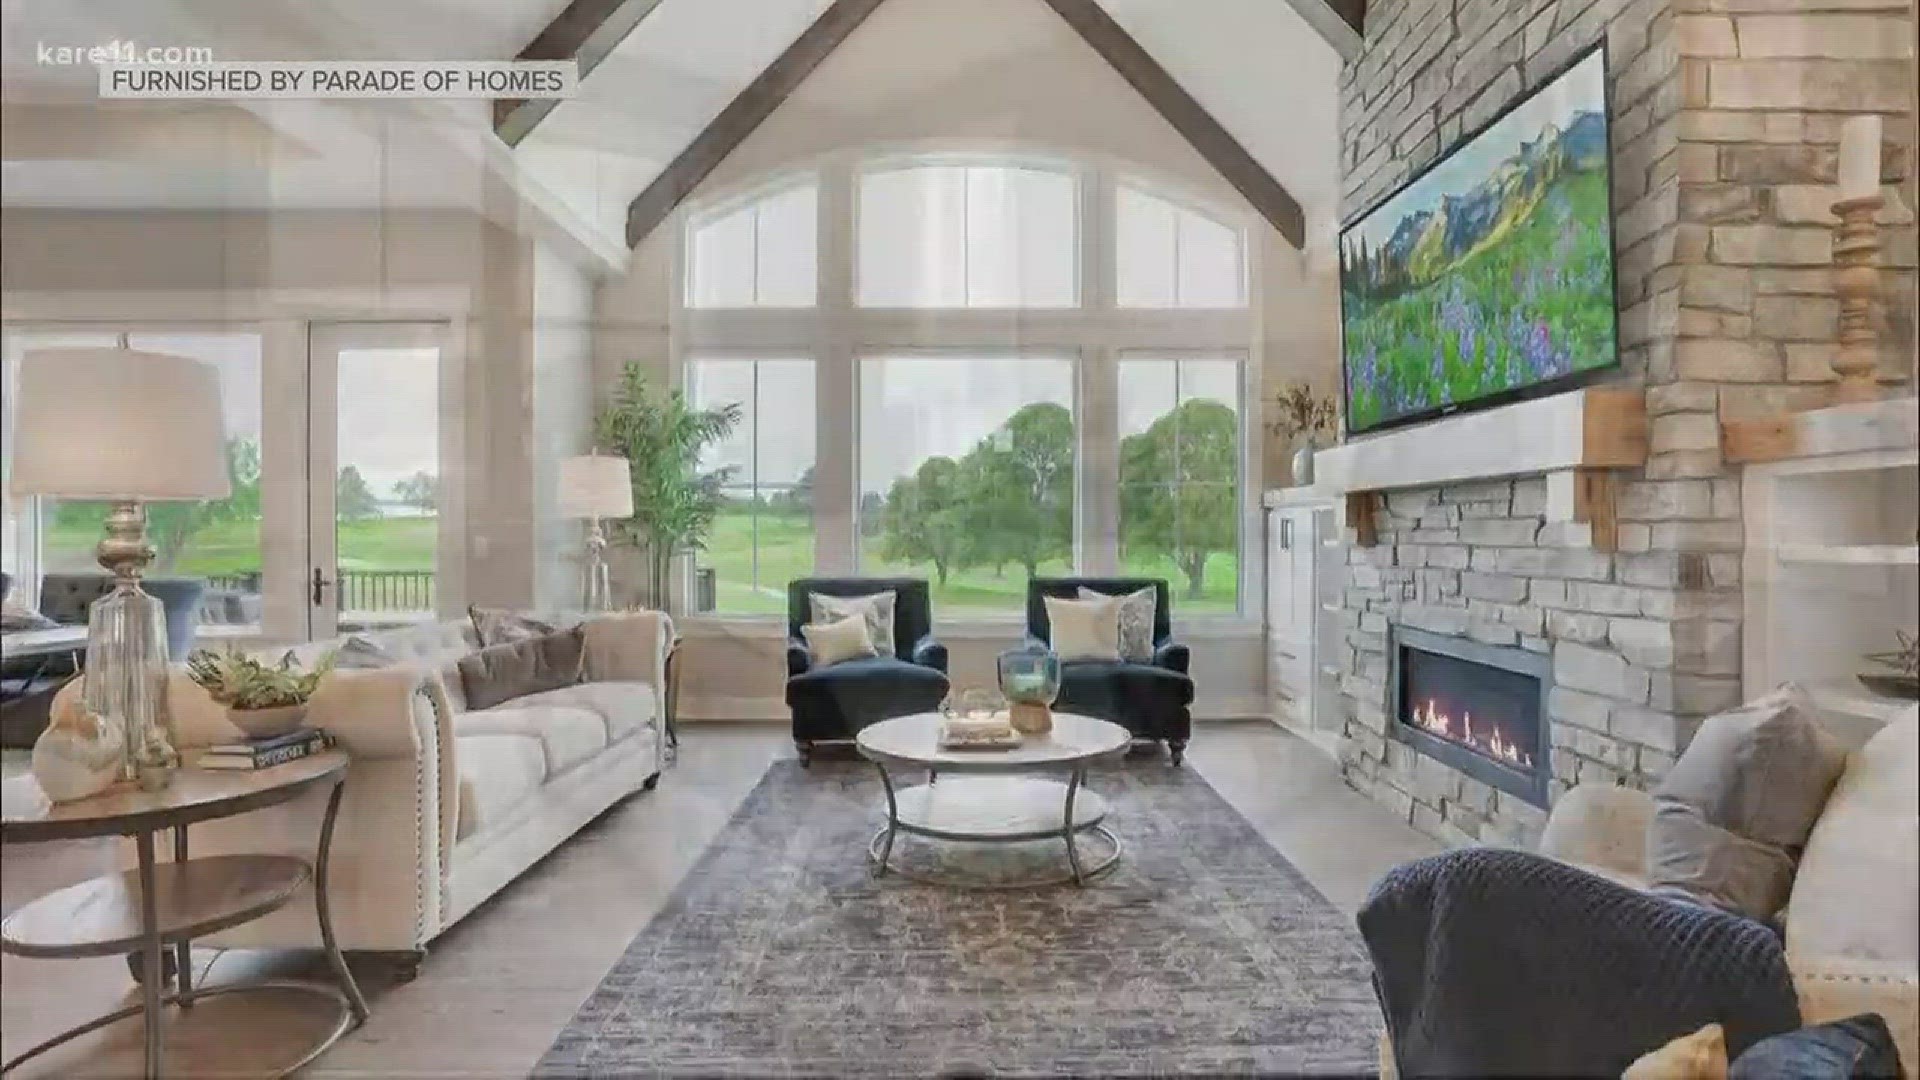 More than 400 houses across the Twin Cities make up this fall's Parade of Homes.